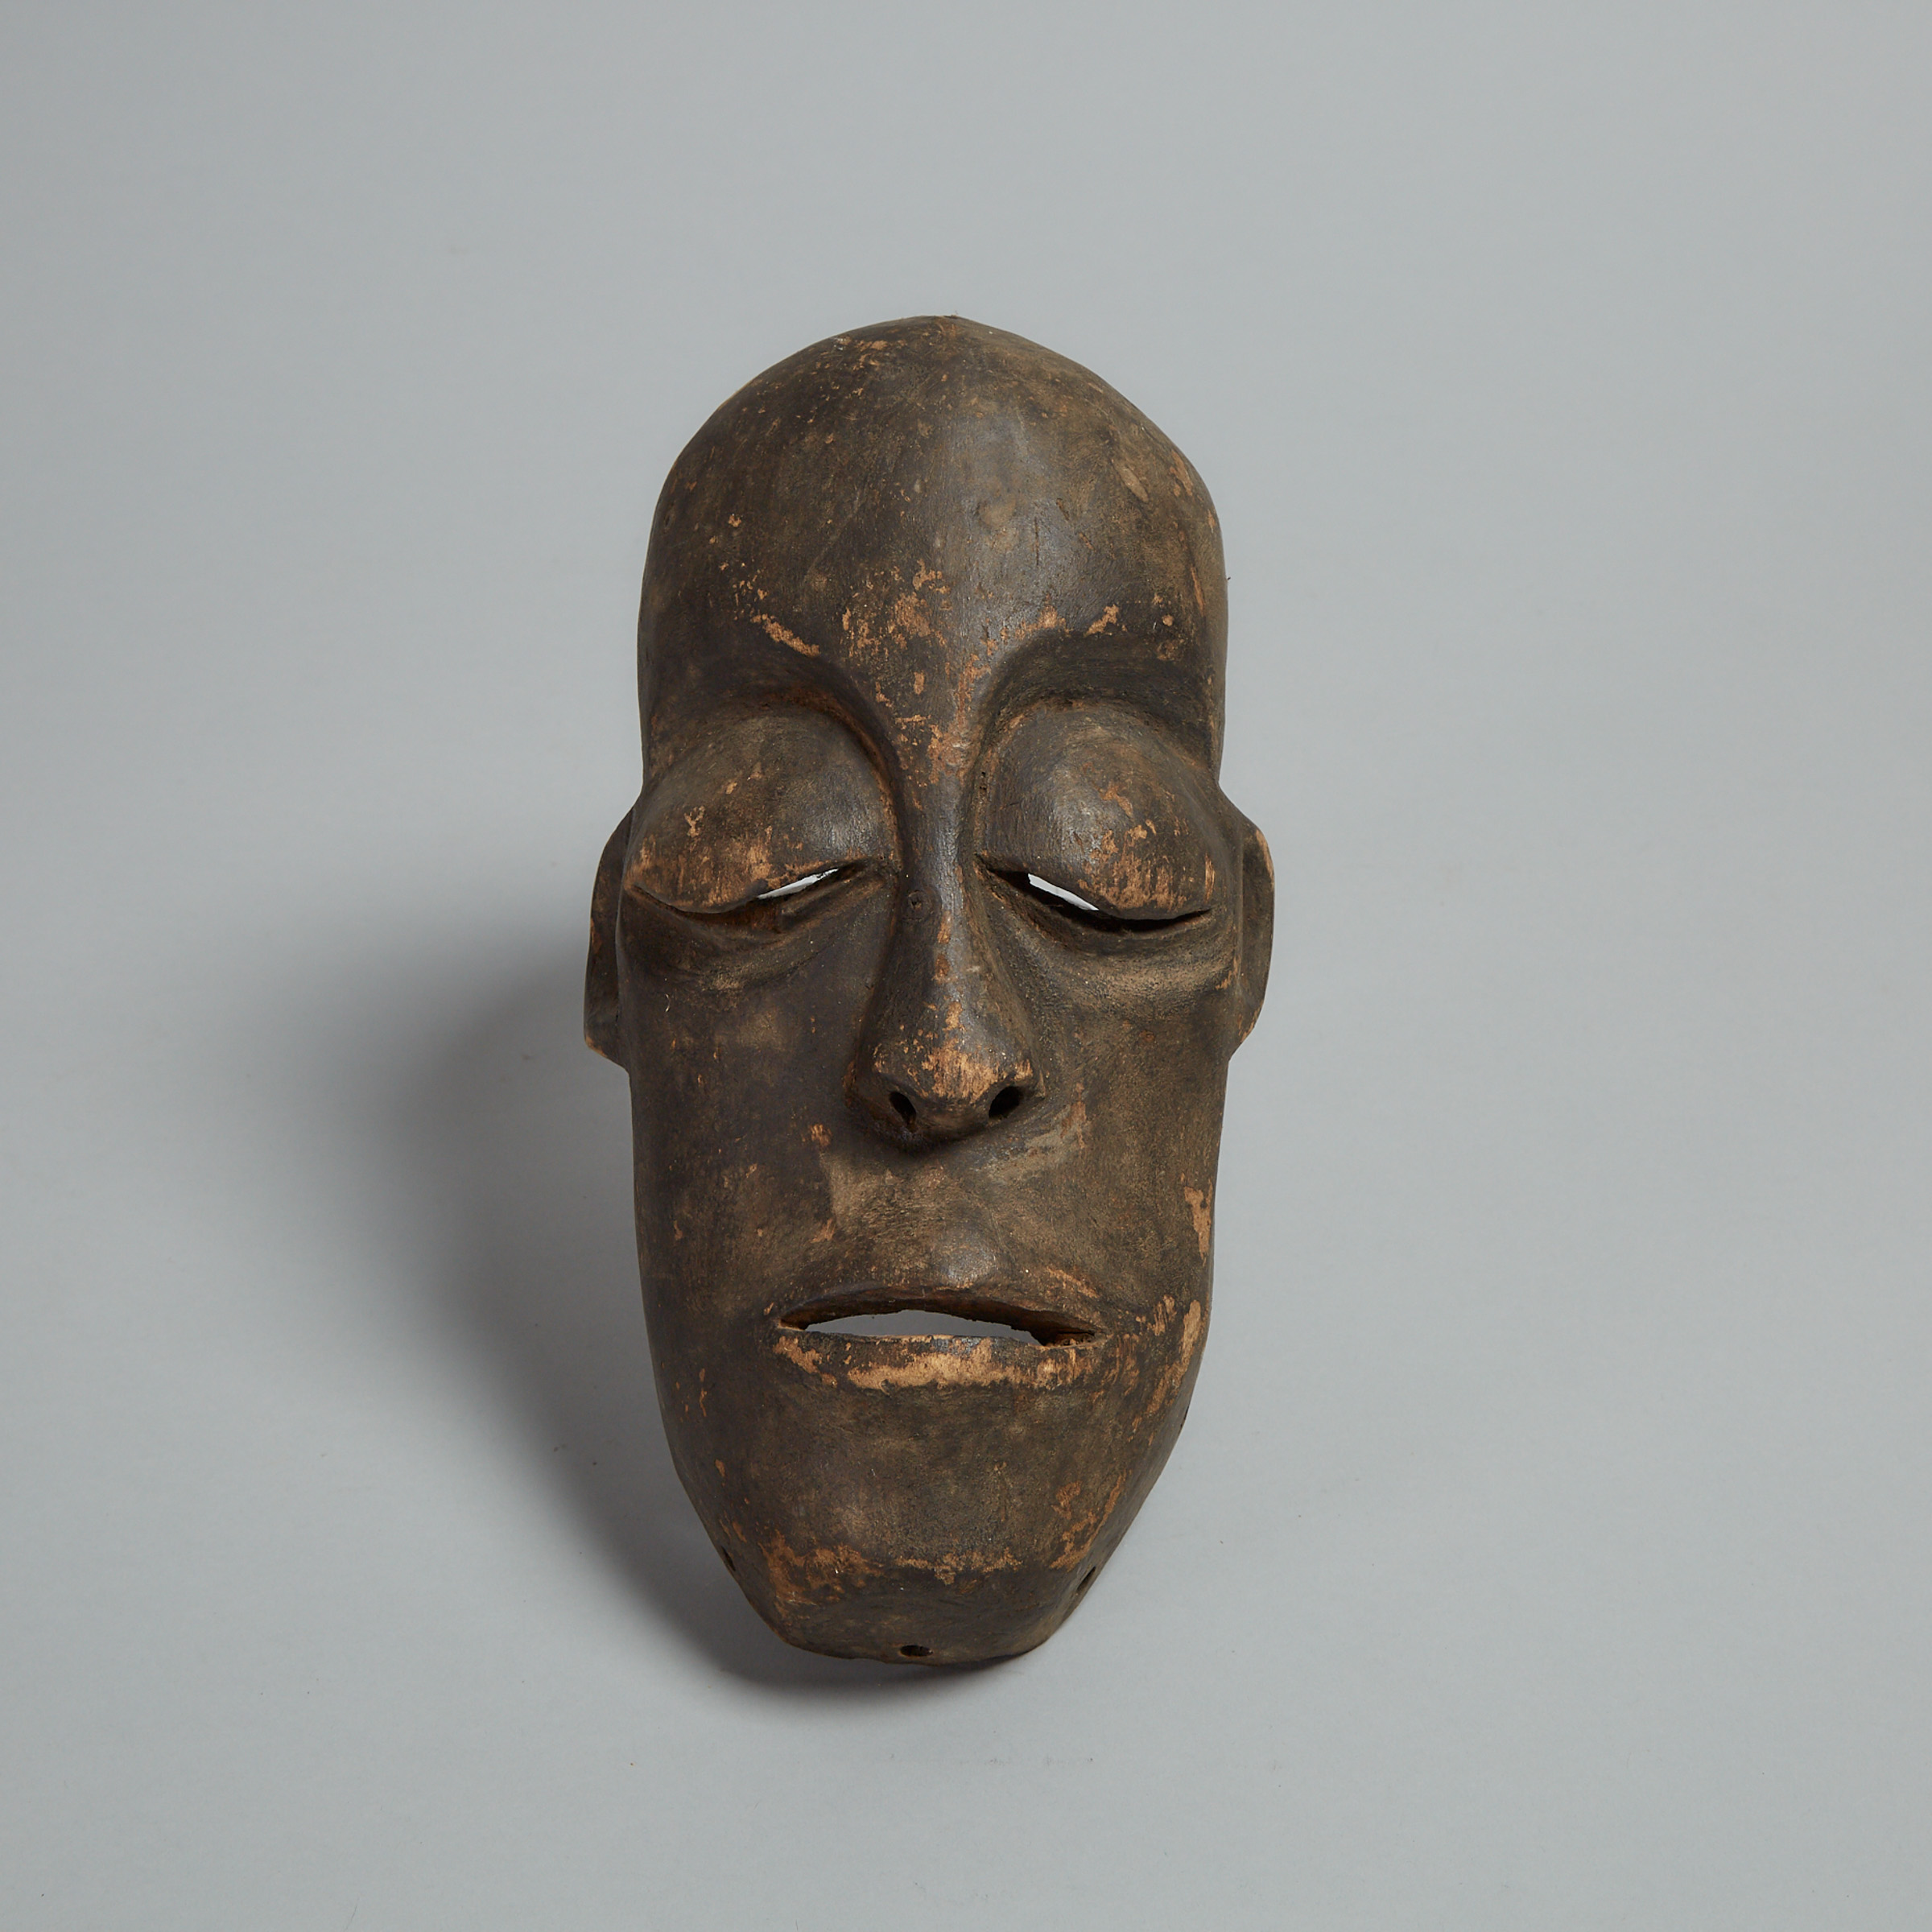 African Mask, possibly Chokwe, Central Africa